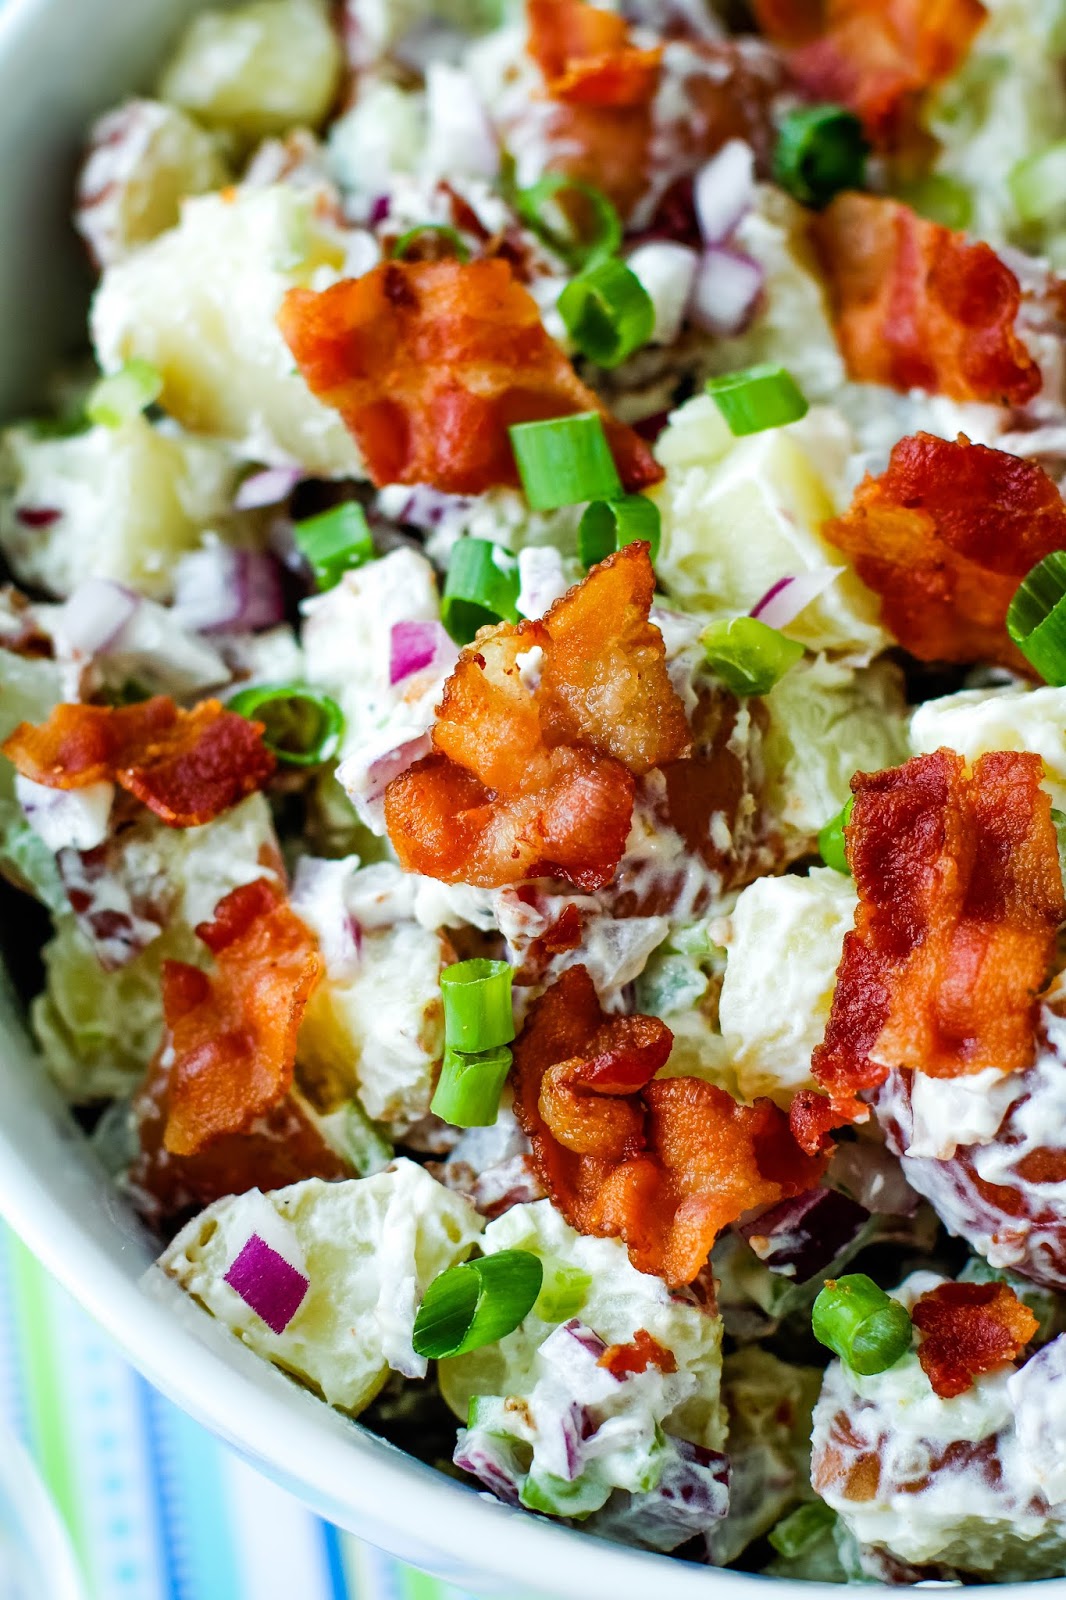 Red Potato Salad with Bacon is made with a cool and creamy mayo-sour cream mixture and tons of crumbled bacon. This simple side dish is perfect for barbecues, parties, and tailgating! #potatosalad #sidedish #bacon